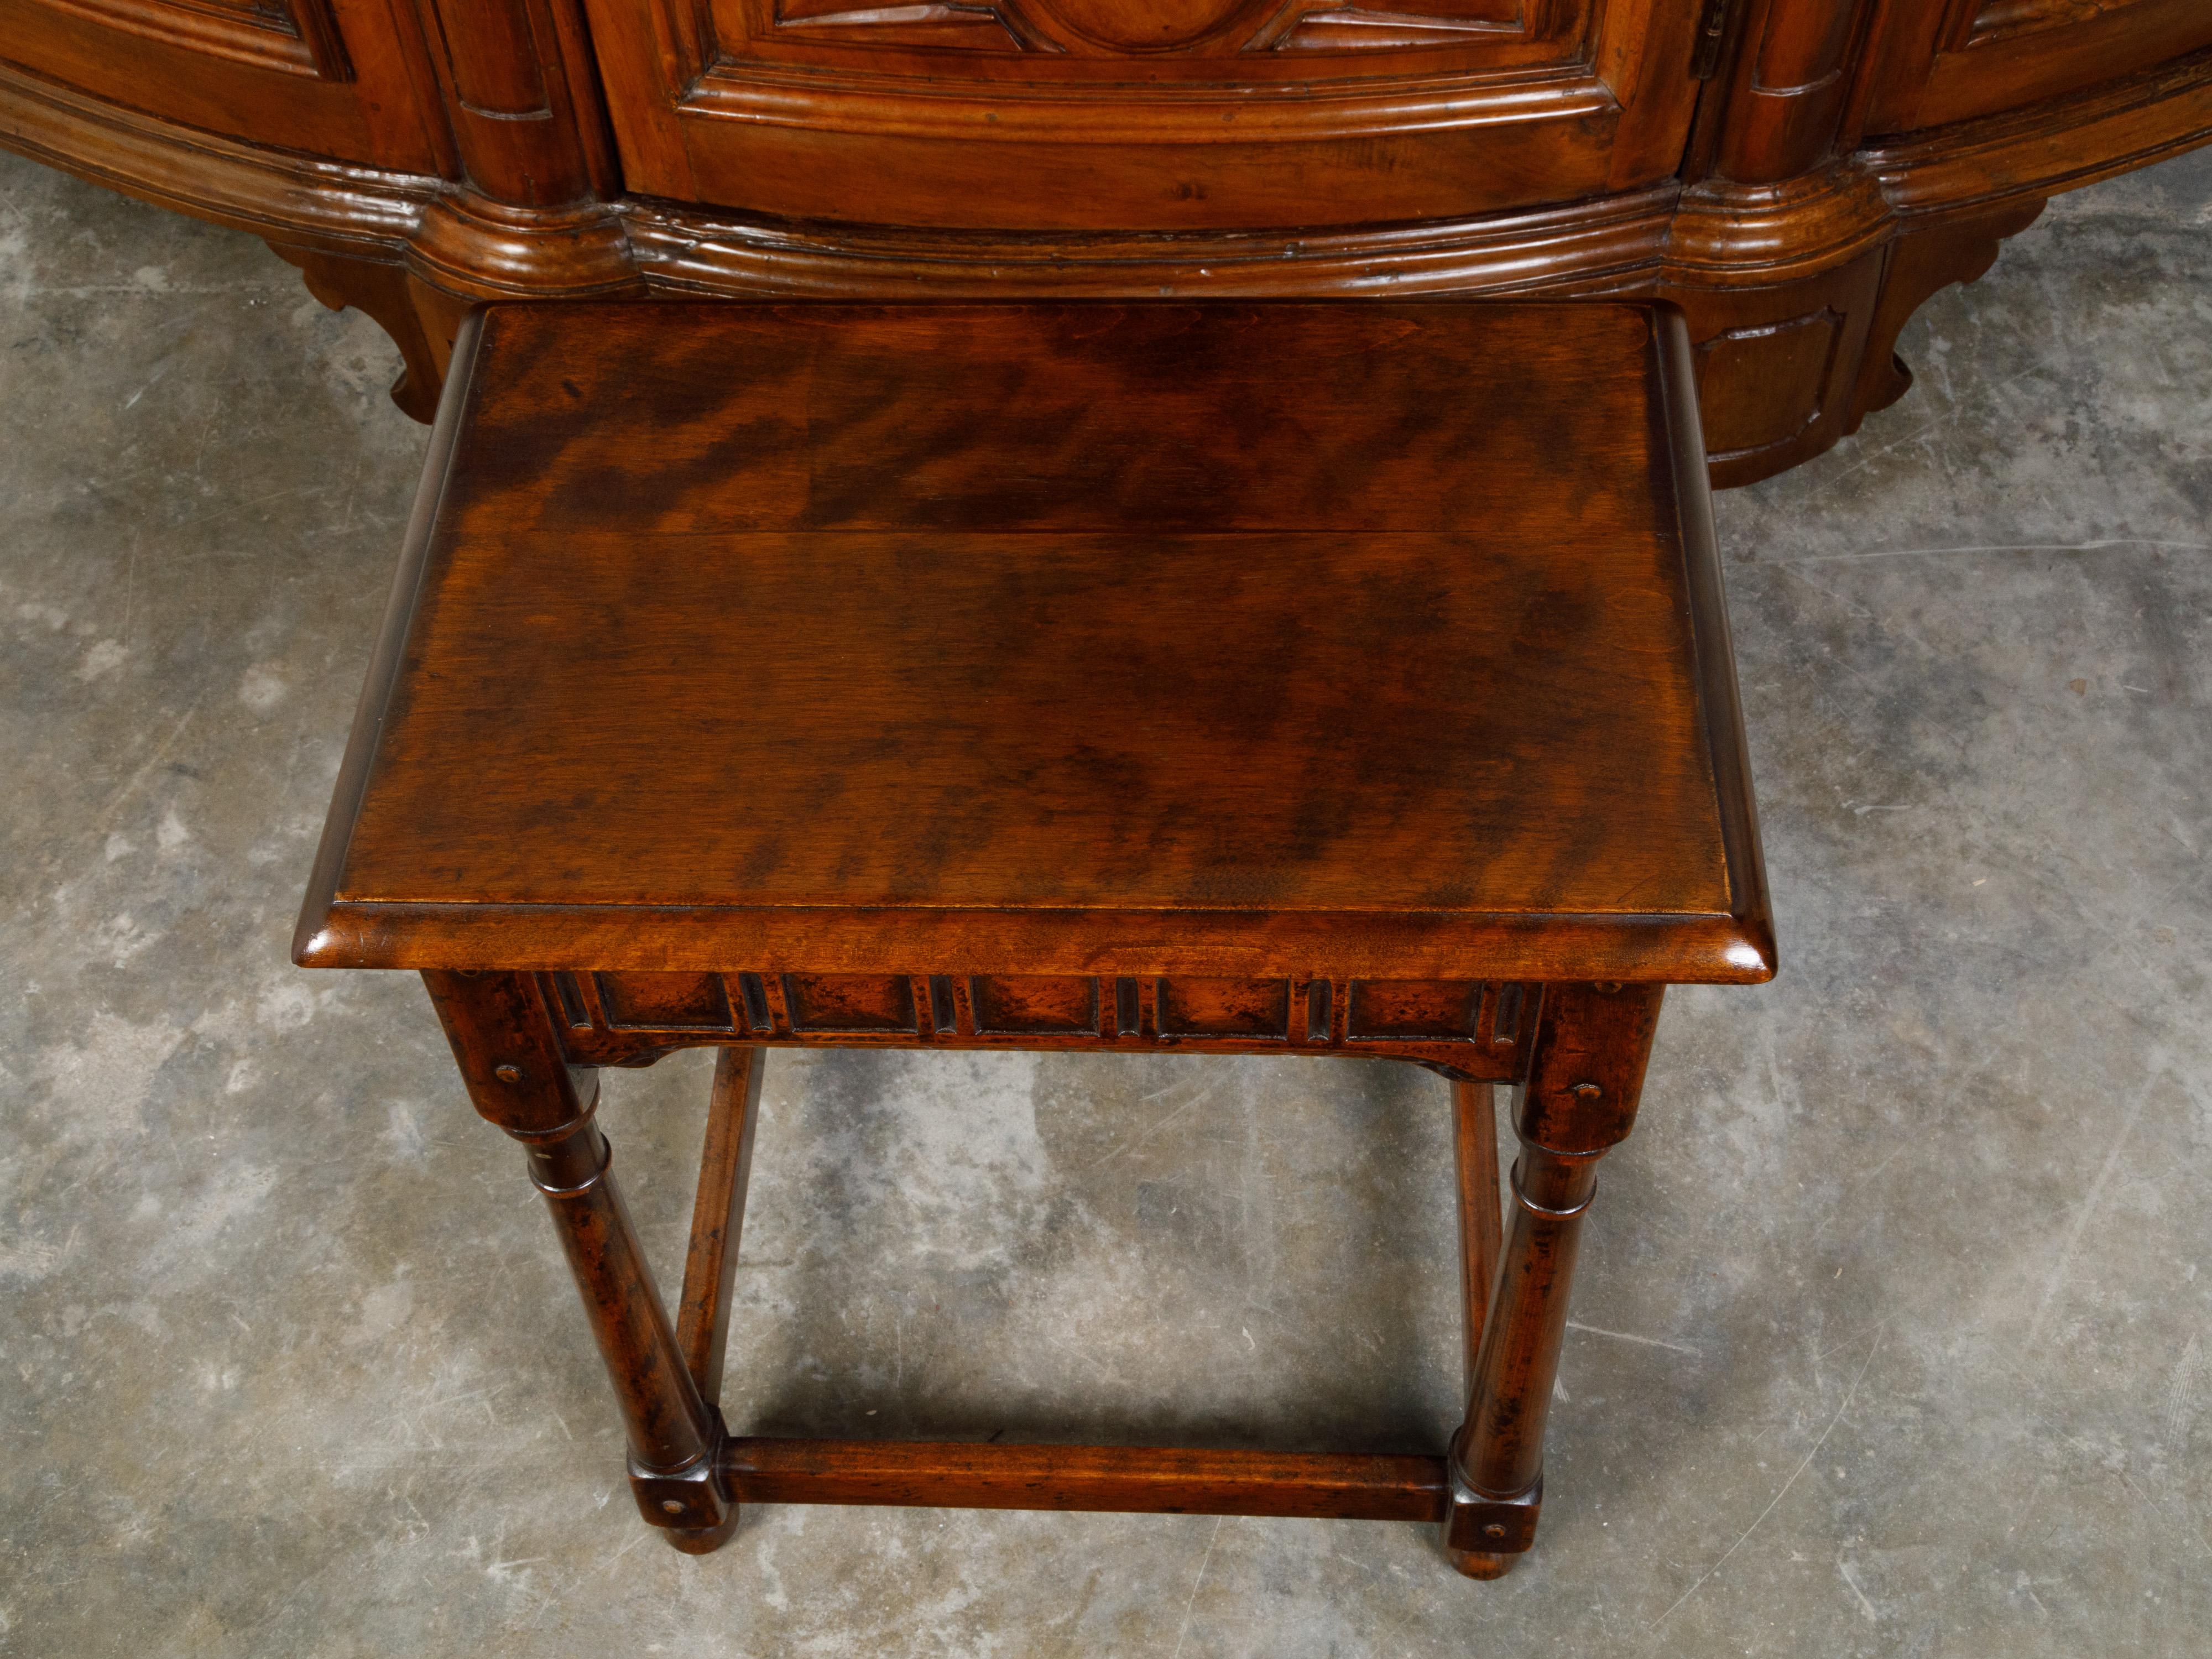 English Midcentury Oak Joint Stool with Carved Apron, Turned Legs and Bun Feet In Good Condition For Sale In Atlanta, GA